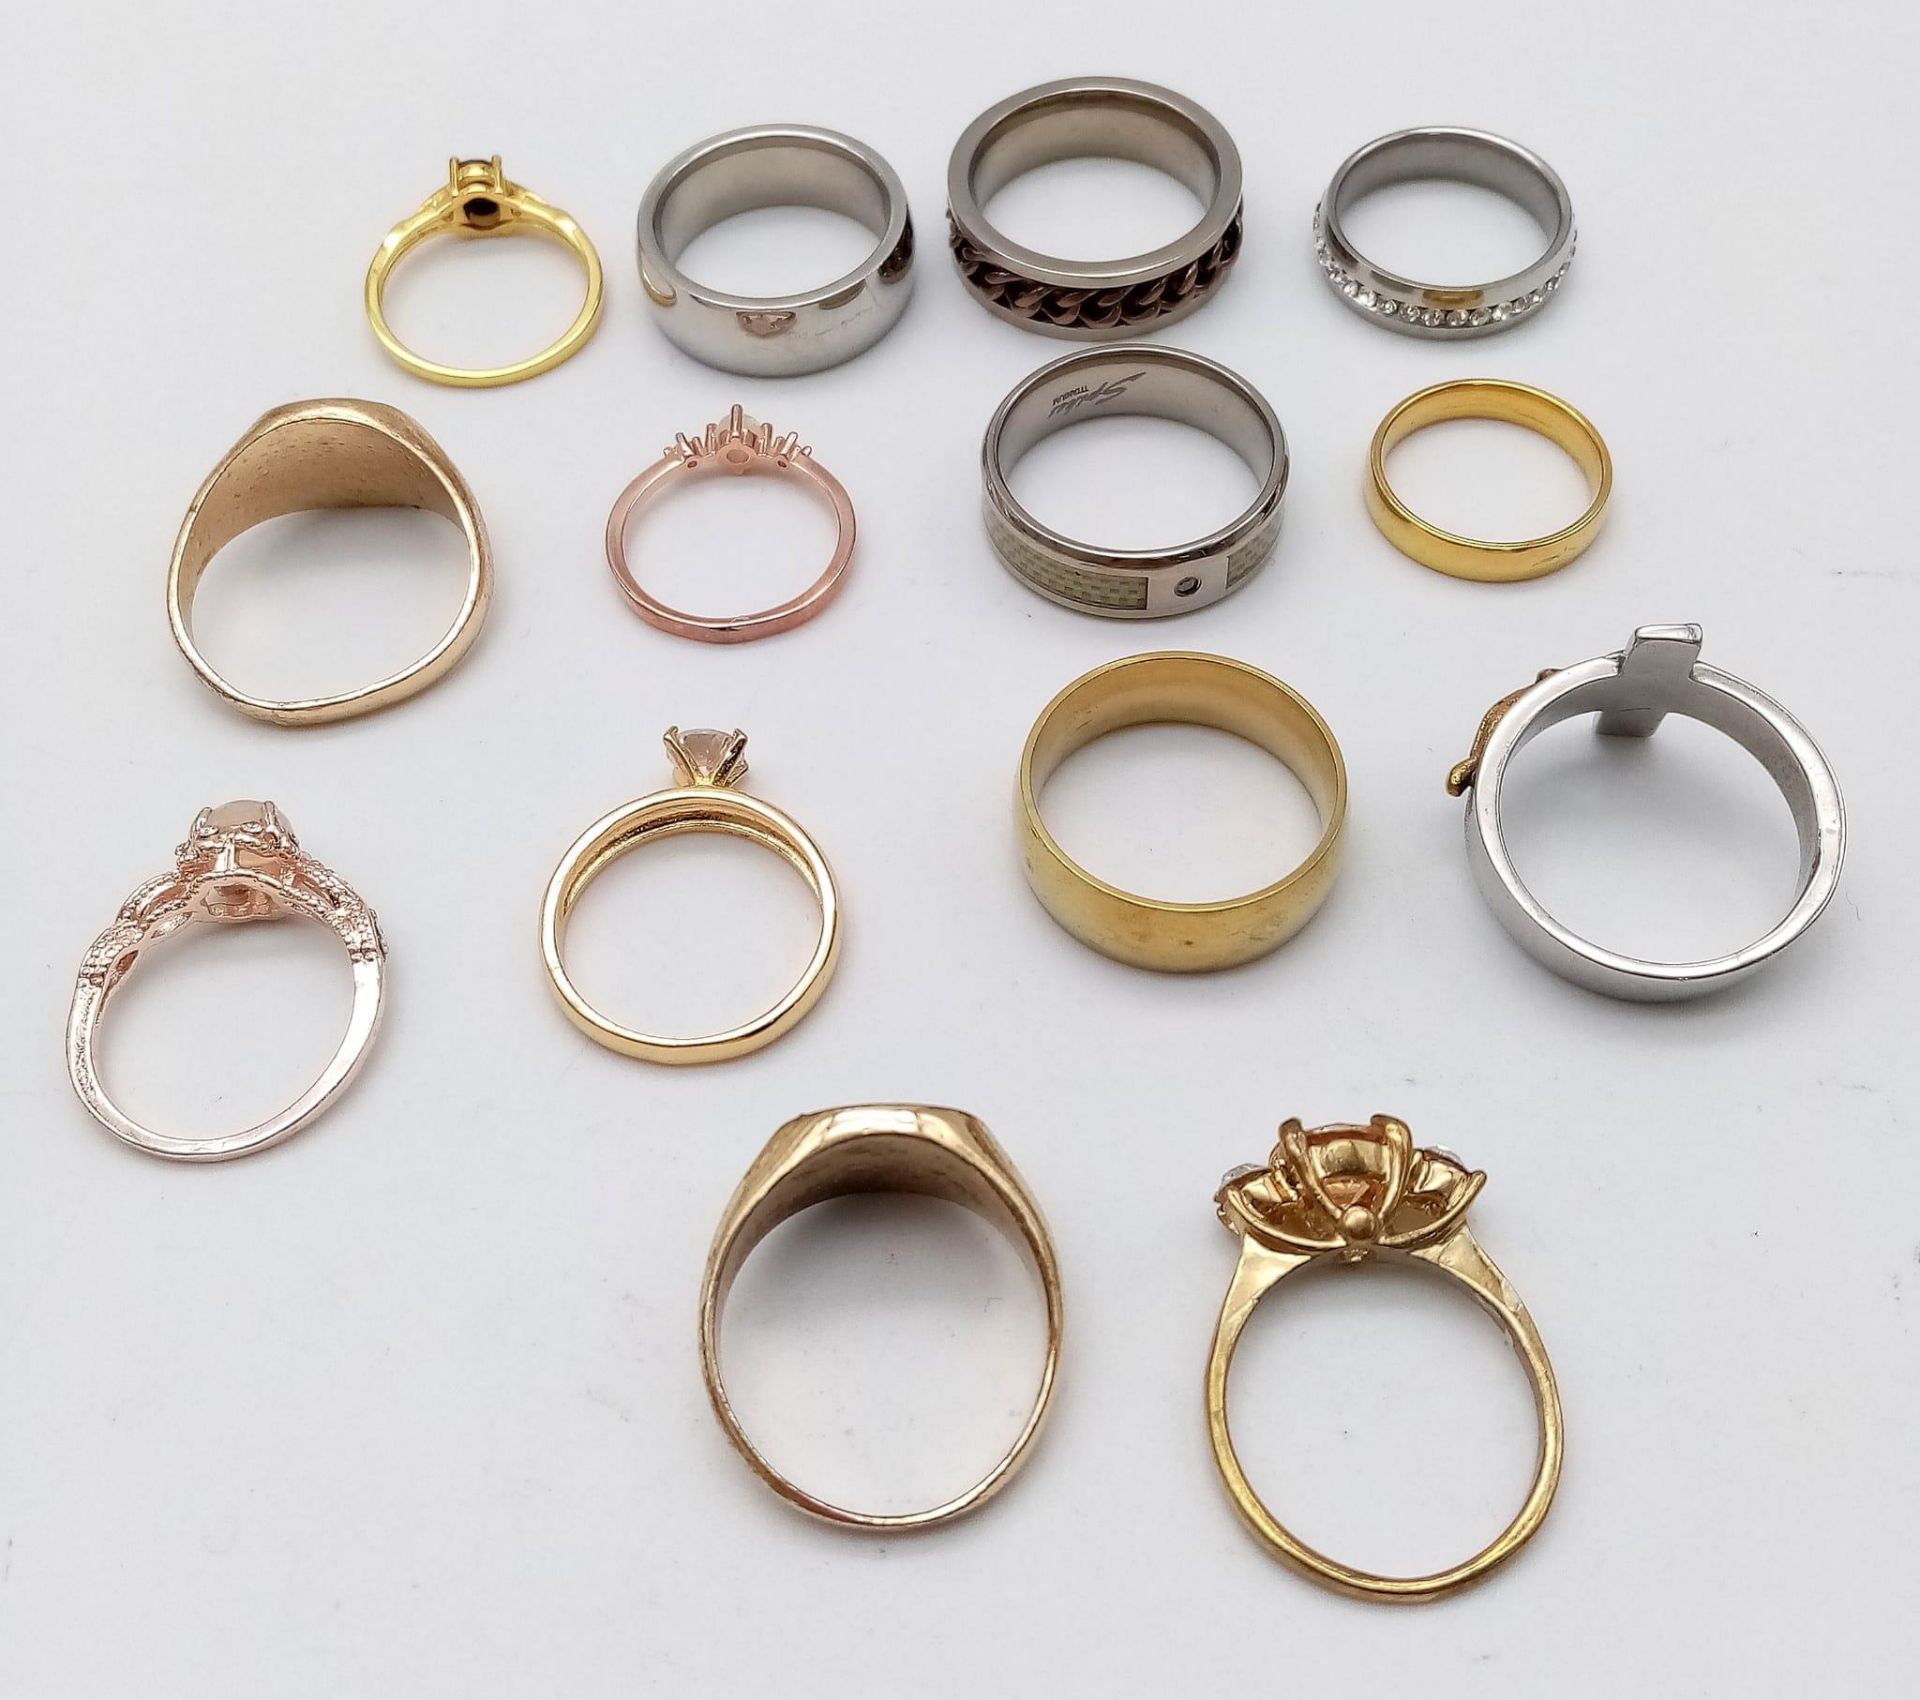 14 Different Style Decorative Rings in Larger Sizes. Set in white and gilded metal. - Image 5 of 7